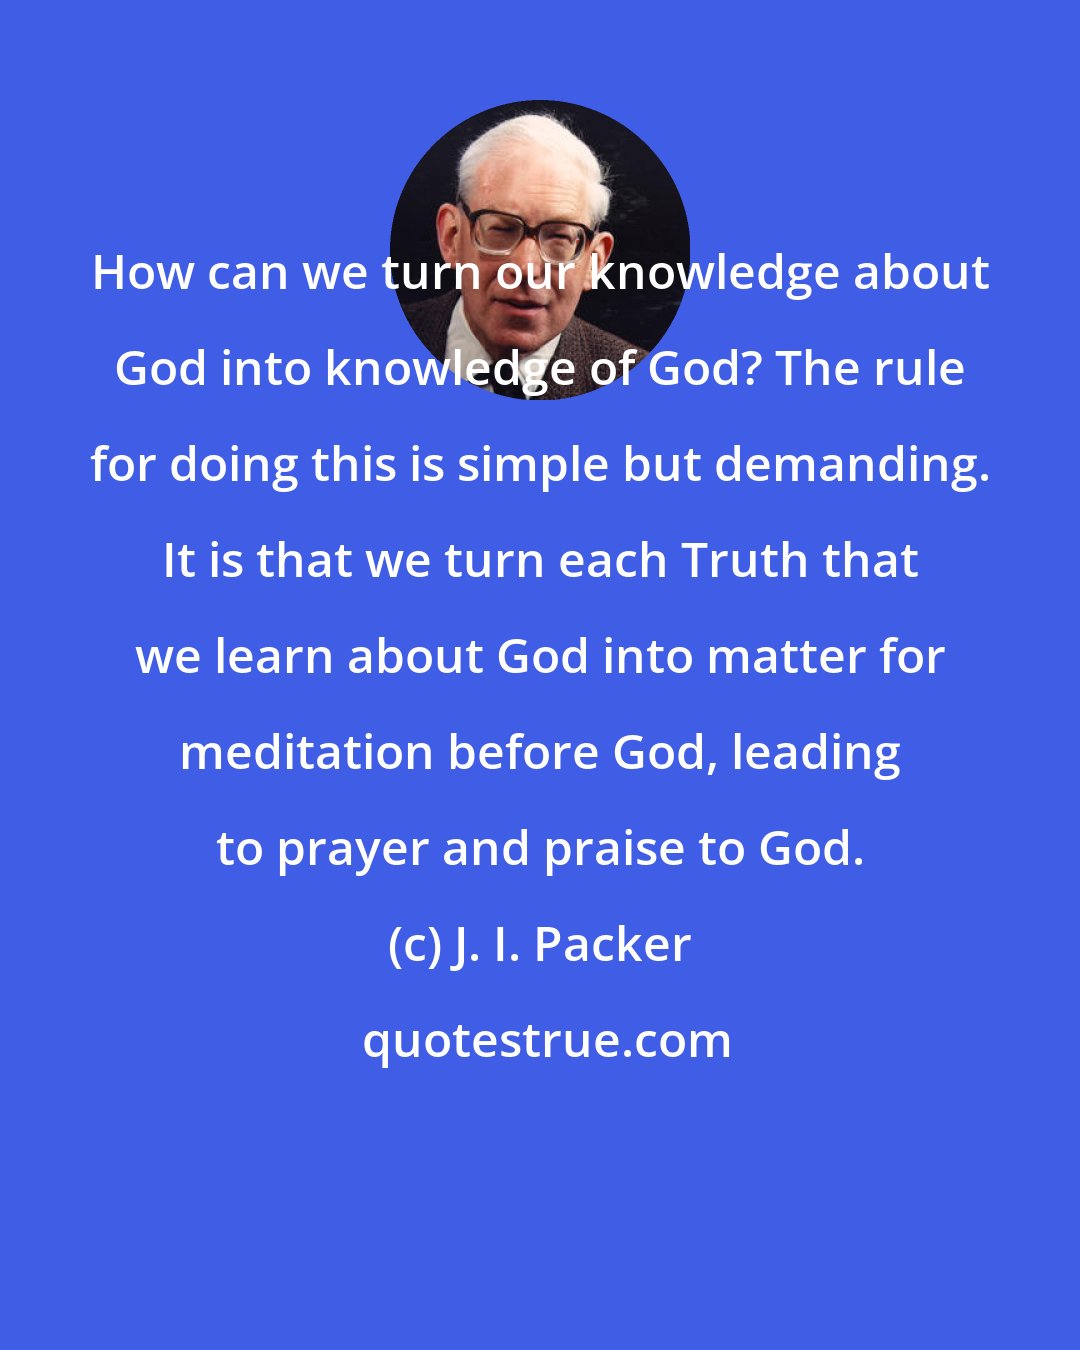 J. I. Packer: How can we turn our knowledge about God into knowledge of God? The rule for doing this is simple but demanding. It is that we turn each Truth that we learn about God into matter for meditation before God, leading to prayer and praise to God.